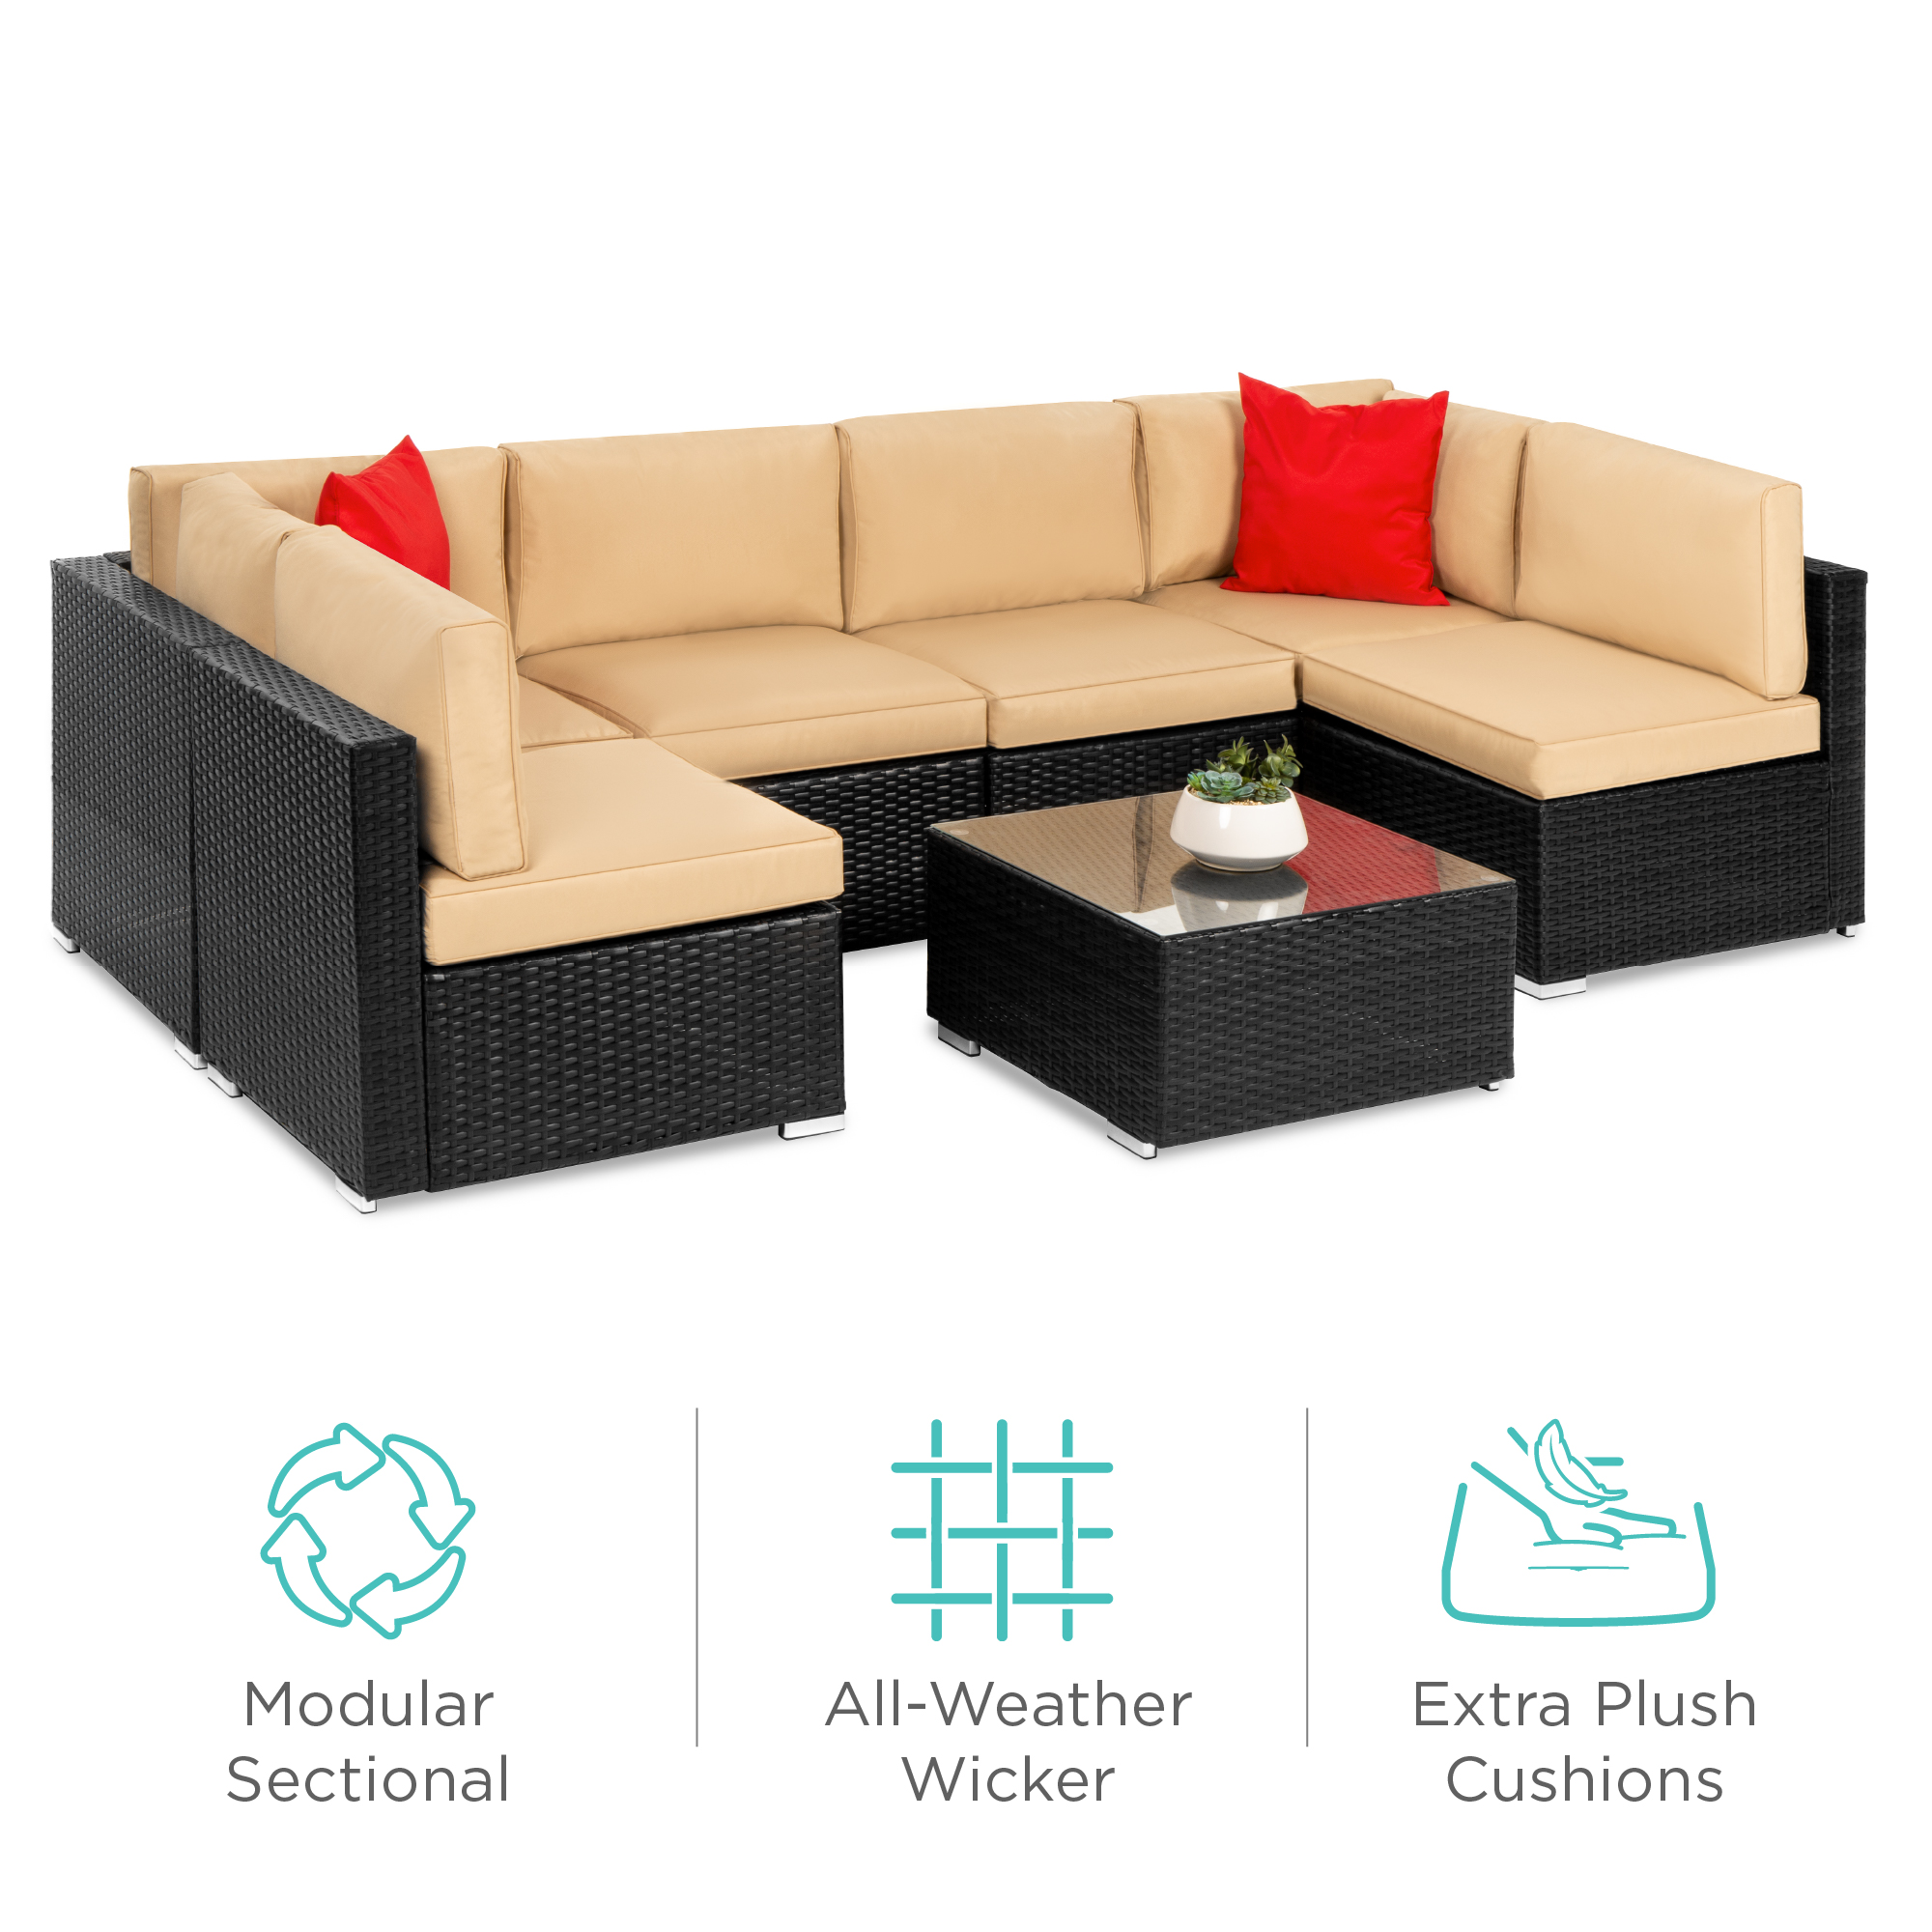 Best Choice Products 7-Piece Outdoor Modular Patio Conversation Furniture, Wicker Sectional Set - Black/Tan - image 1 of 8